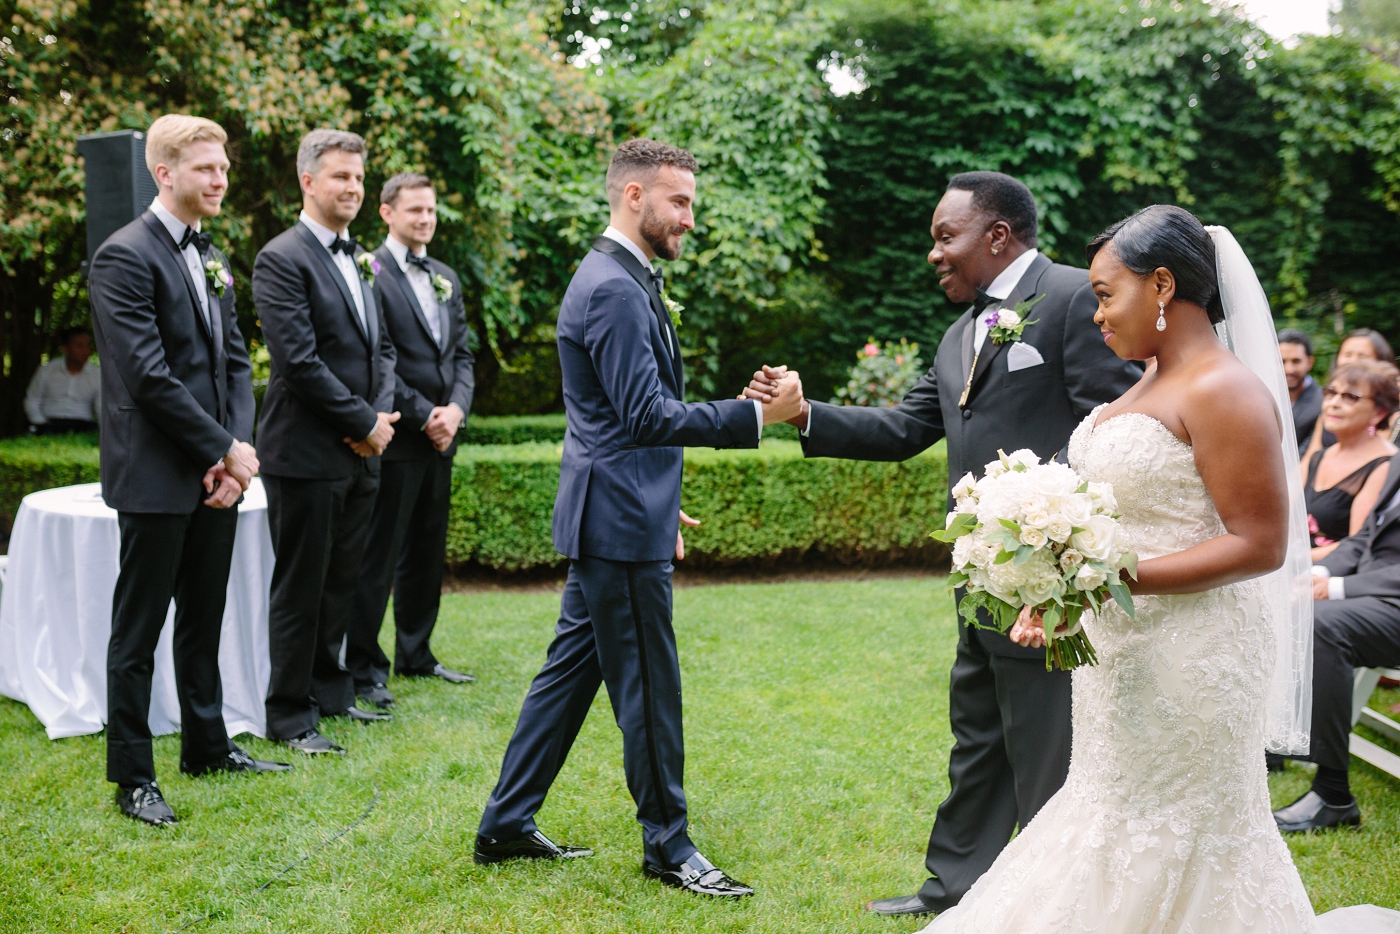 groom shaking hands with father of the bride at wedding ceremony